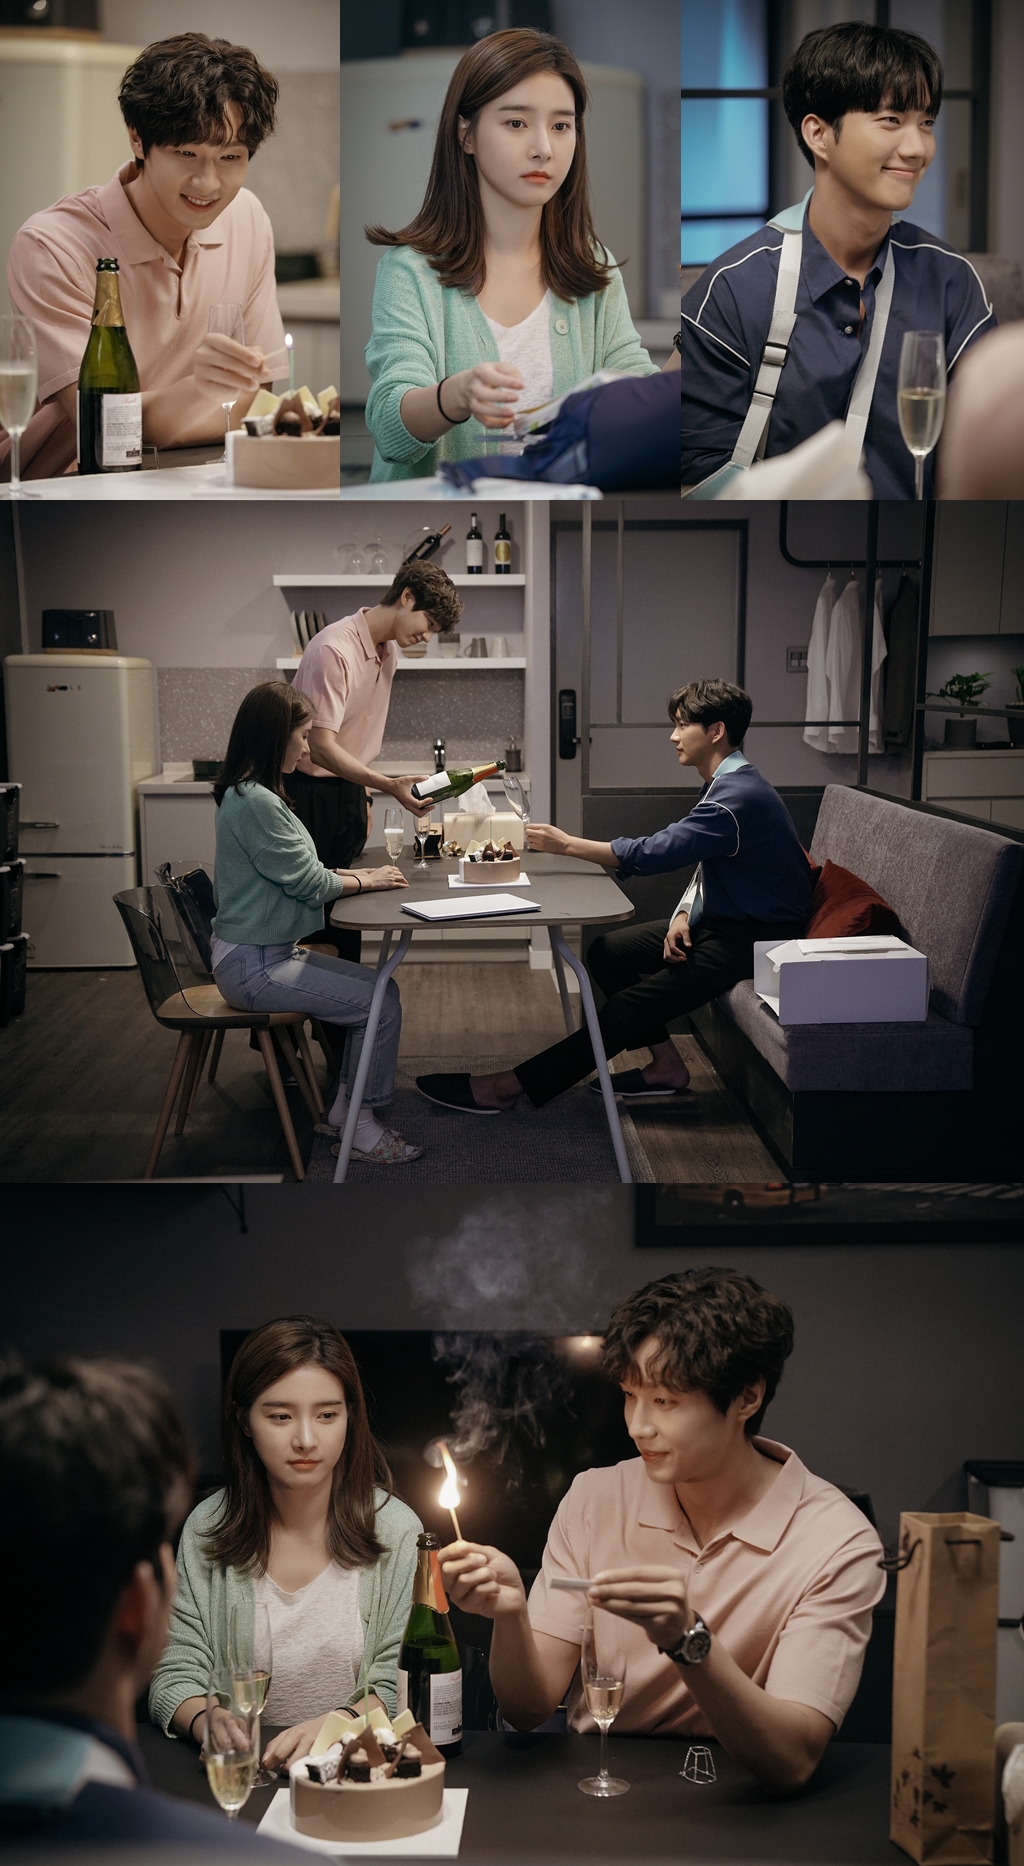 Love is annoying, but I hate loneliness! The triangular romance of Ji Hyun Woo, Kim So-eun, and Park Geonil was lit.MBC Everly One O Lizzyal drama Love is annoying but I hate lonely! (playplay by Cho Jin-guk/director Lee Hyun-joo/Produced MBC Everly One, Number Three Pictures/hereinafter Love is annoying ...) started the triangular romance of three attractive 2030 men and women in earnest.A woman between a steamed charmer and an 18-year-old South Sachin, with a fresh excitement, many viewers are wondering where these three men and womens Cupid arrows will head.Last time, Love is annoying ... In the third ending, Ji Hyun Woo has been working hard to fix Lee Na-euns laptop.But what he witnessed was Lee Na-eun and gang hyun (Park Geonil), who fell to the floor as if they were backherg.In fact, Lee Na-eun, who was trying to catch a bug, was given a fall by a gang hyun, but it may be misunderstood.The three embarrassed figures created subtle tensions.Meanwhile, on August 31, Love is annoying, but the production team is focusing attention on the three main characters of the triangular romance gathered in one place ahead of the 4th broadcast.In the photo, Cha Kang-woo, Lee Na-eun, and gang hyun are gathered in the living room of the gang hyun house.Cha Gang-u and Lee Na-eun sit side by side with the table between them, and gang hyun sit in front of the two.The faces of three people who light candles on cakes and drink champagne together as if to celebrate something are full of happy smiles.Earlier Lee Na-eun was contacted by the ancient Publishers.Lee Na-eun, an aspiring novelist, sent his manuscripts to several Publishers, but it was hard to get even evaluated, let alone published.The Publishers representative who contacted me advised Lee Na-eun to write a web novel, which frustrated Lee Na-eun.Lee Na-eun, who did, was contacted by Publishers that she wanted to publish her novel.Cha Gang-woo and gang hyun are the ones who are as happy as Lee Na-eun when they hear this news.Cha Gang-woo, Lee Na-eun, and gang hyun-jins full-fledged triangular romance has begun: Cha Gang-woo, a steamed charmer who has warm comfort in the words of throwing.The worlds most comfortable but suddenly approaching man, 18 years of southern man, gang hyun. Which of these minds will Lee Na-eun lean?What kind of thrill will the triangular romance of the three people give?MBC Everlon OLizyal drama Love is annoying but I hate lonely! The fourth episode will air tomorrow (1st) Tuesday night at 10:50 p.m.Prior to that, three episodes will be rebroadcasted on MBC at 9:30 pm on Monday, August 31.iMBC  Photo MBC Everlon